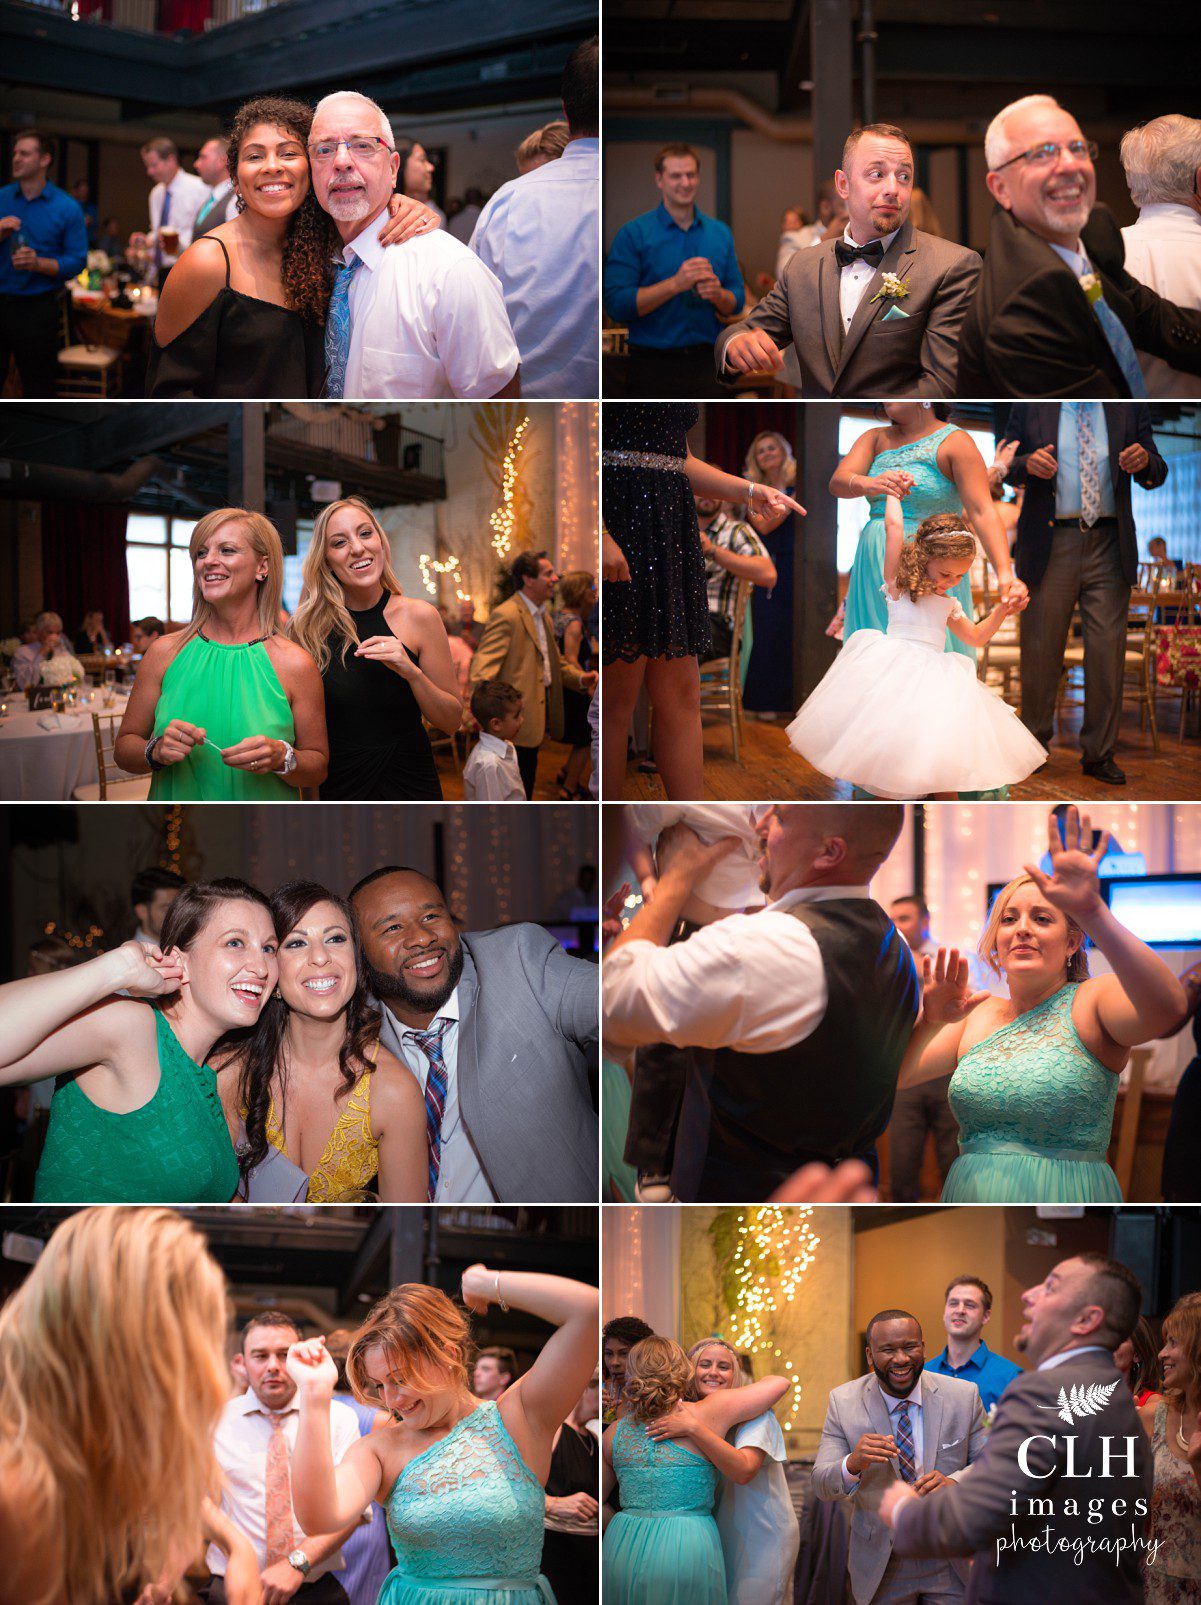 clh-images-photography-ashley-and-rob-day-wedding-revolution-hall-wedding-troy-ny-wedding-photography-180